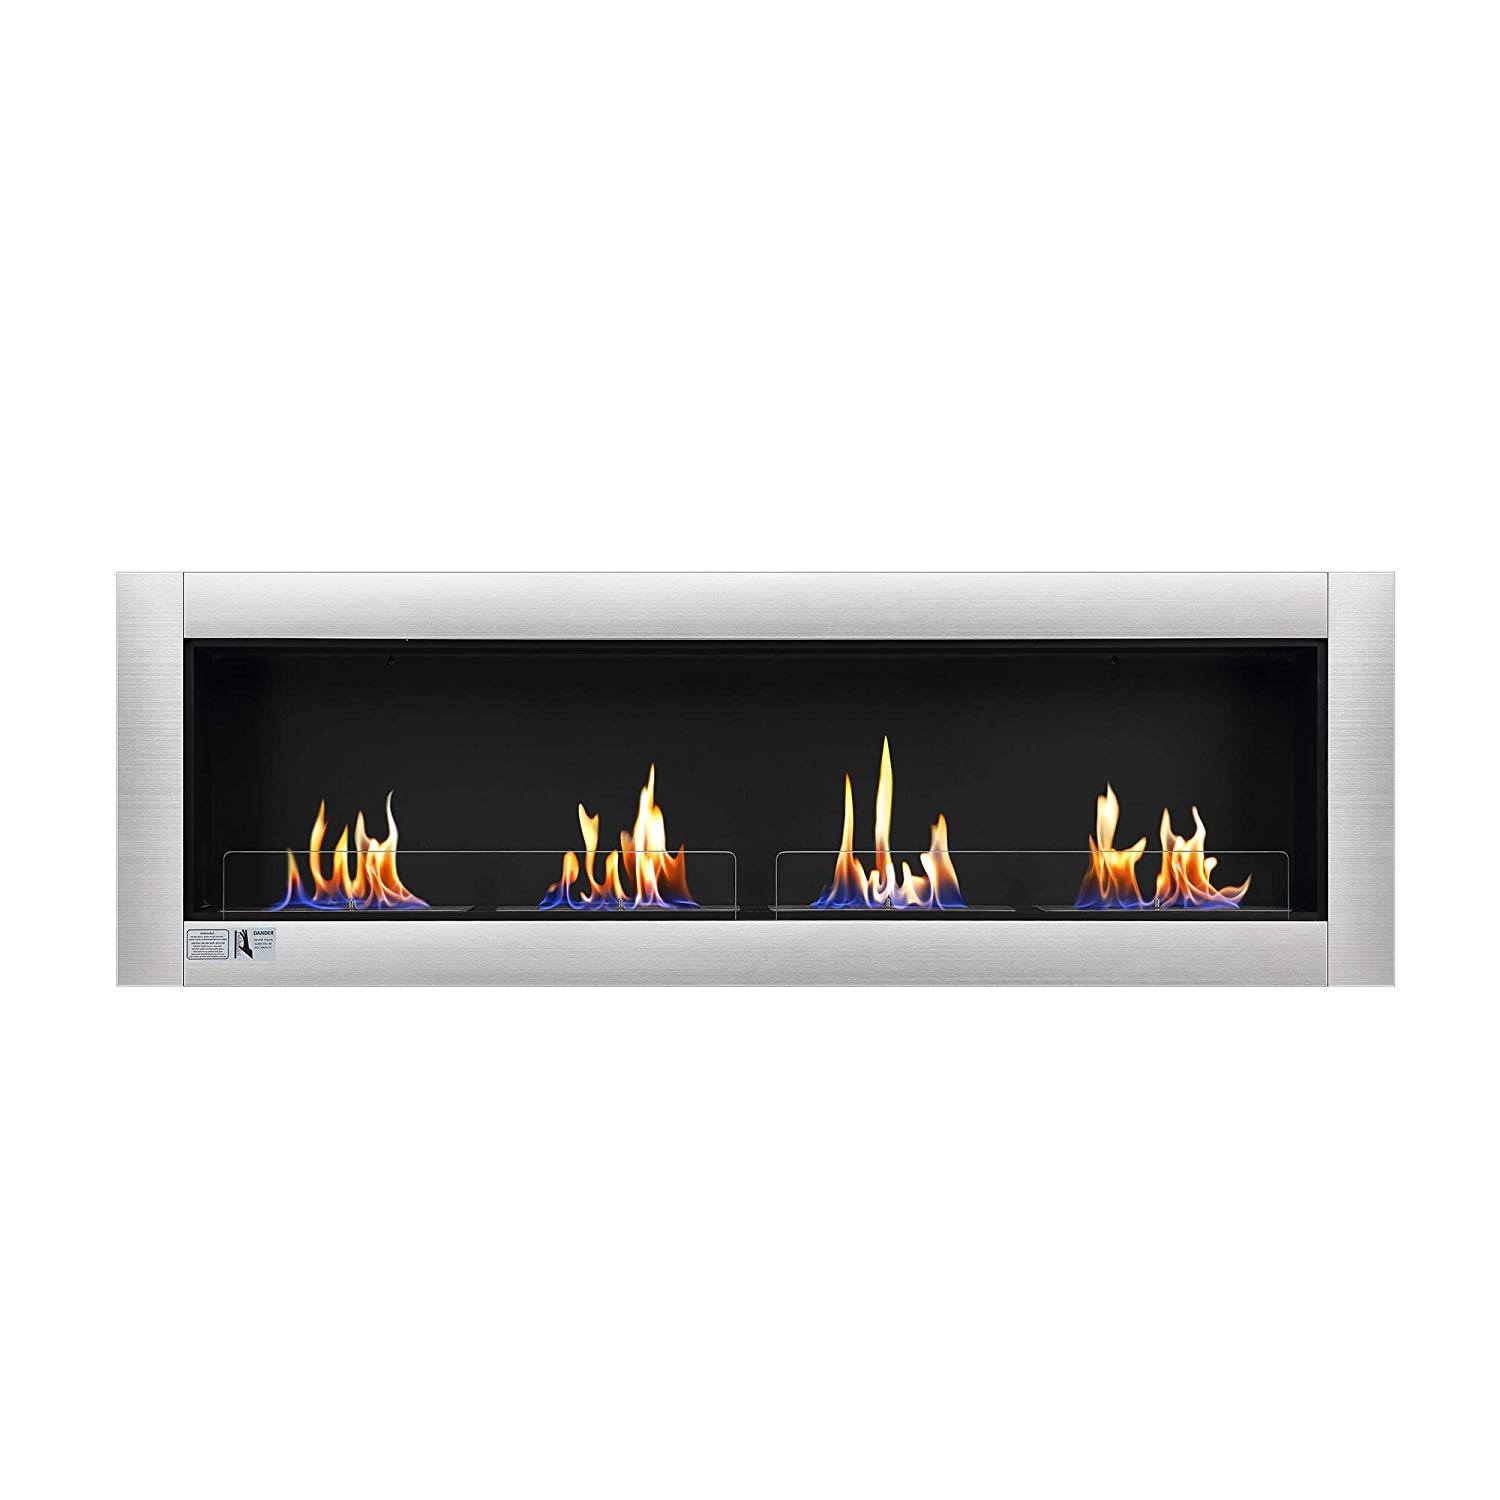 Adding A Fireplace to An Interior Wall Elegant Amazon Antarctic Star 66" Ventless Ethanol Fireplace